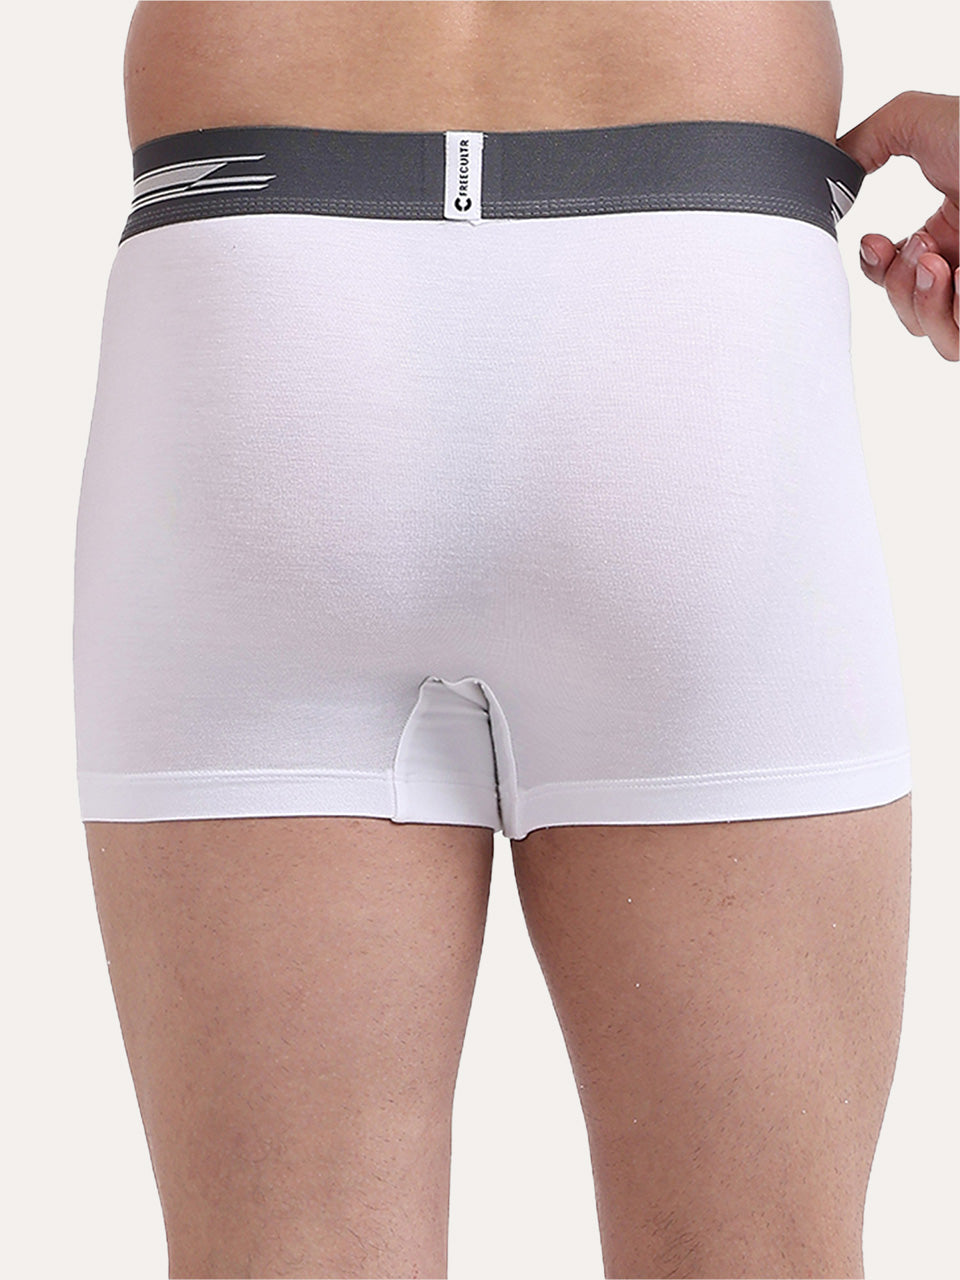 Men's Anti-Bacterial Micro Modal Trunk in Contrast Waistband (Pack of 2)